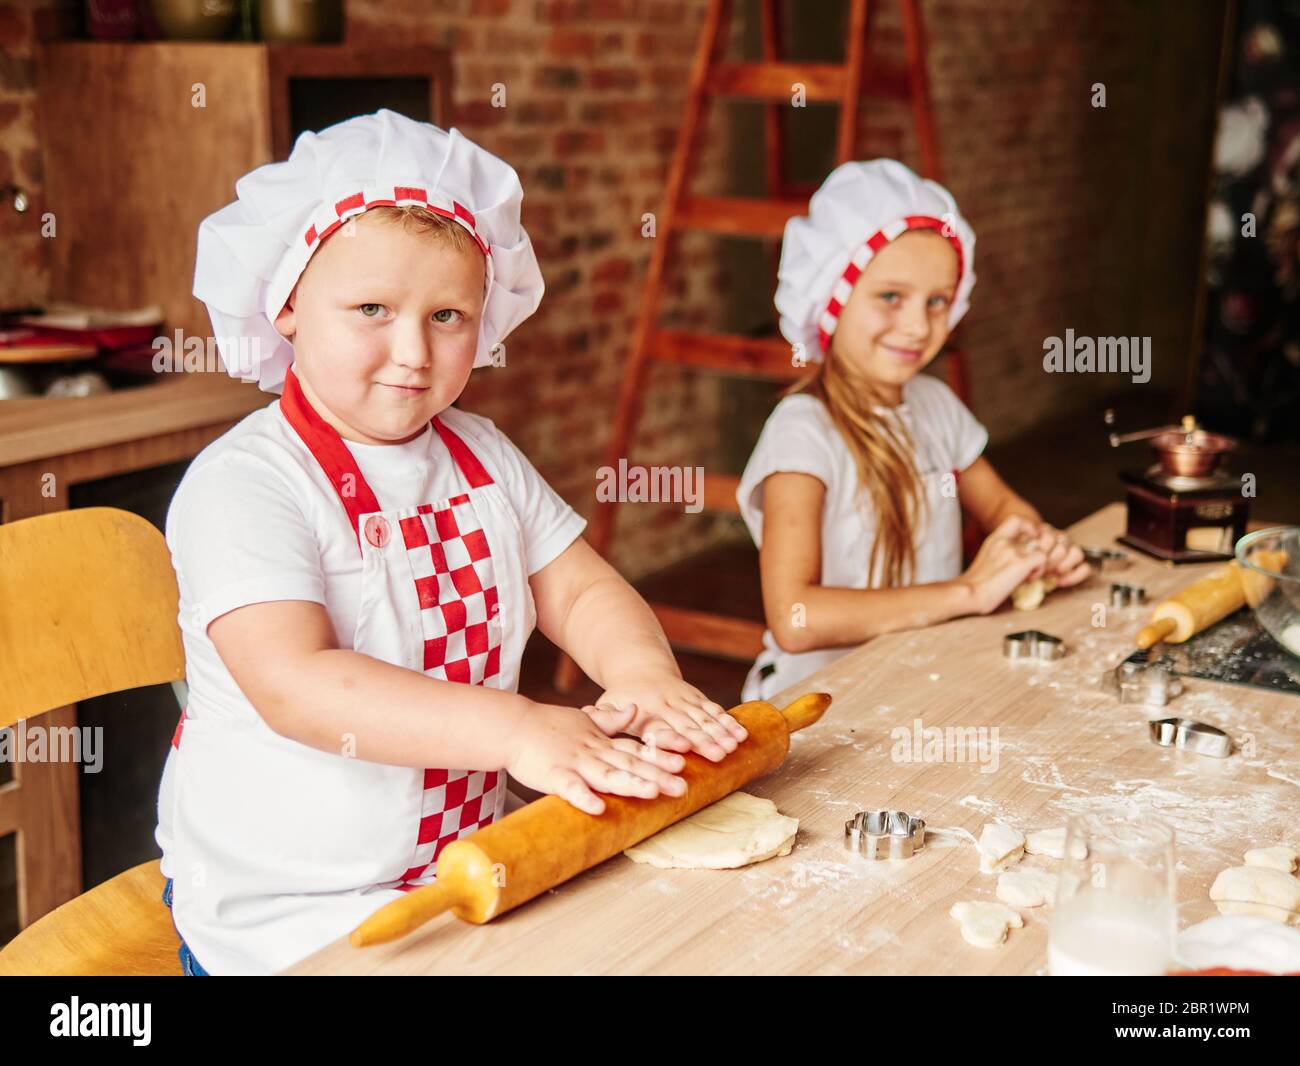 Little boy is cooking in a domestic kitchen. Happy family, happy kids concept Stock Photo